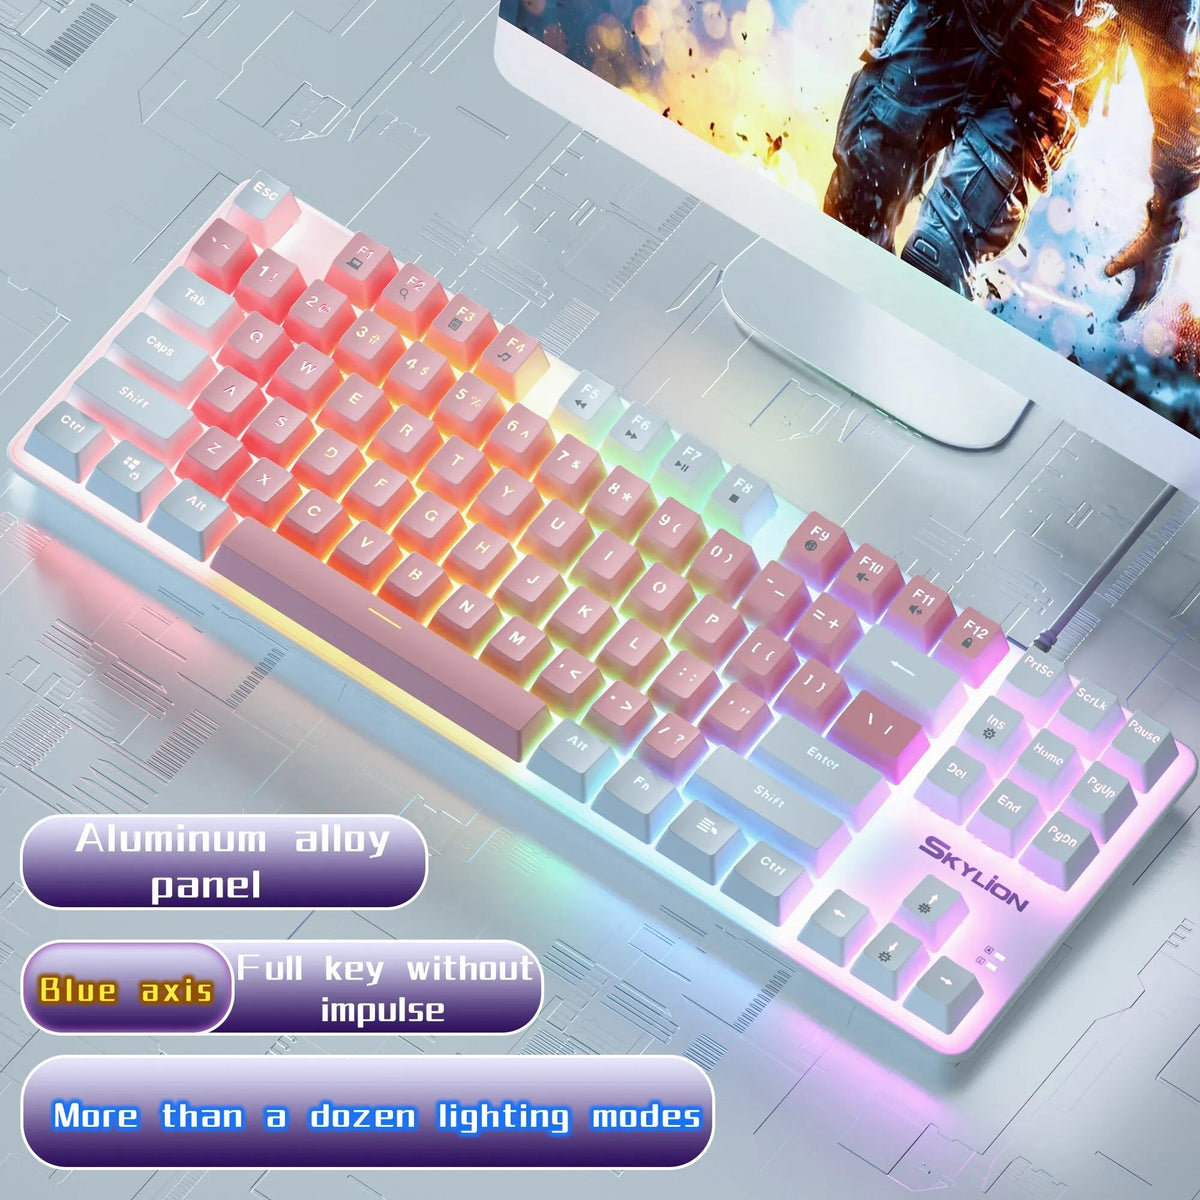 SKYLION H87 Wired Mechanical Keyboard: 10 Colorful Lighting Modes for Gaming & Office | Compatible with Windows & iOS Green Shaft / pink-white